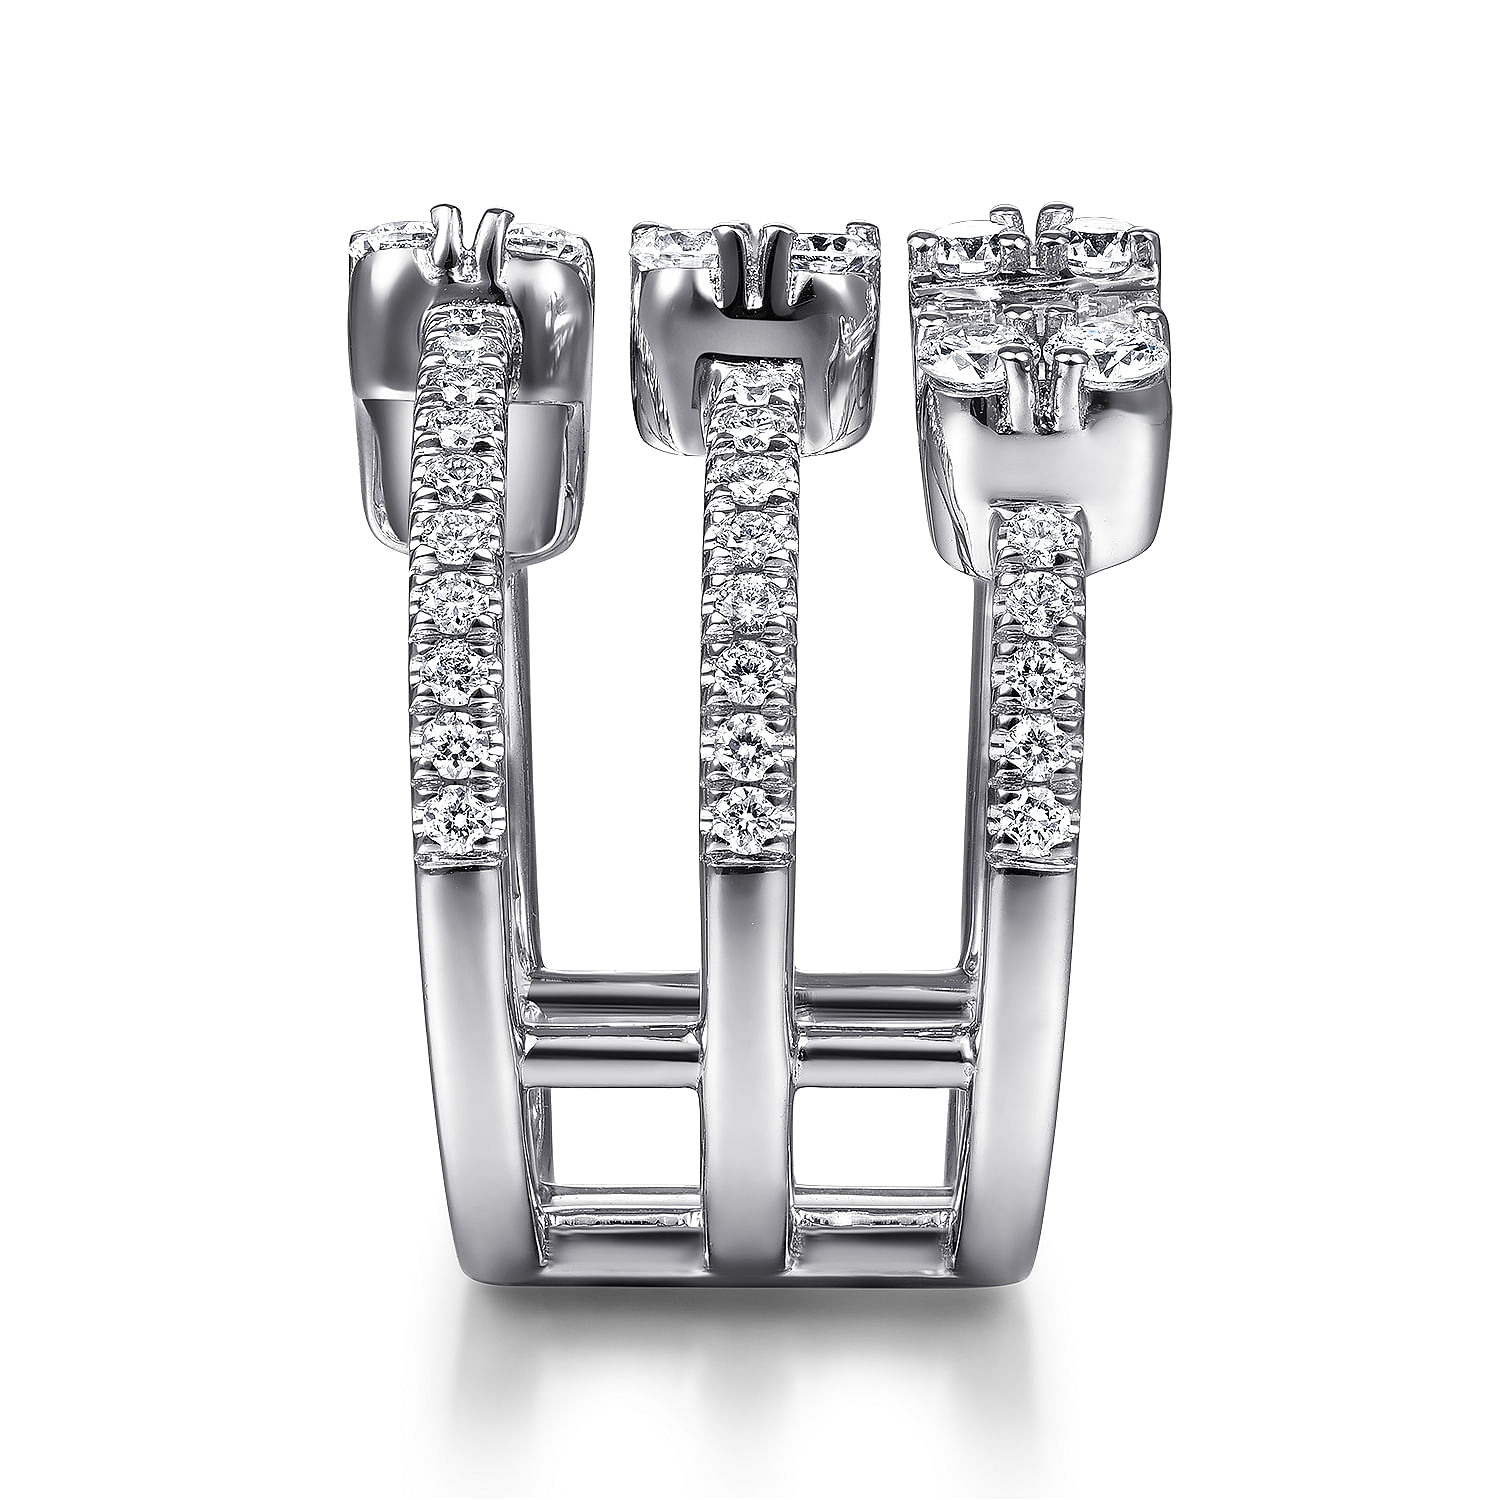 18K White Gold Three Row Baguette and Round Diamond Station Ring